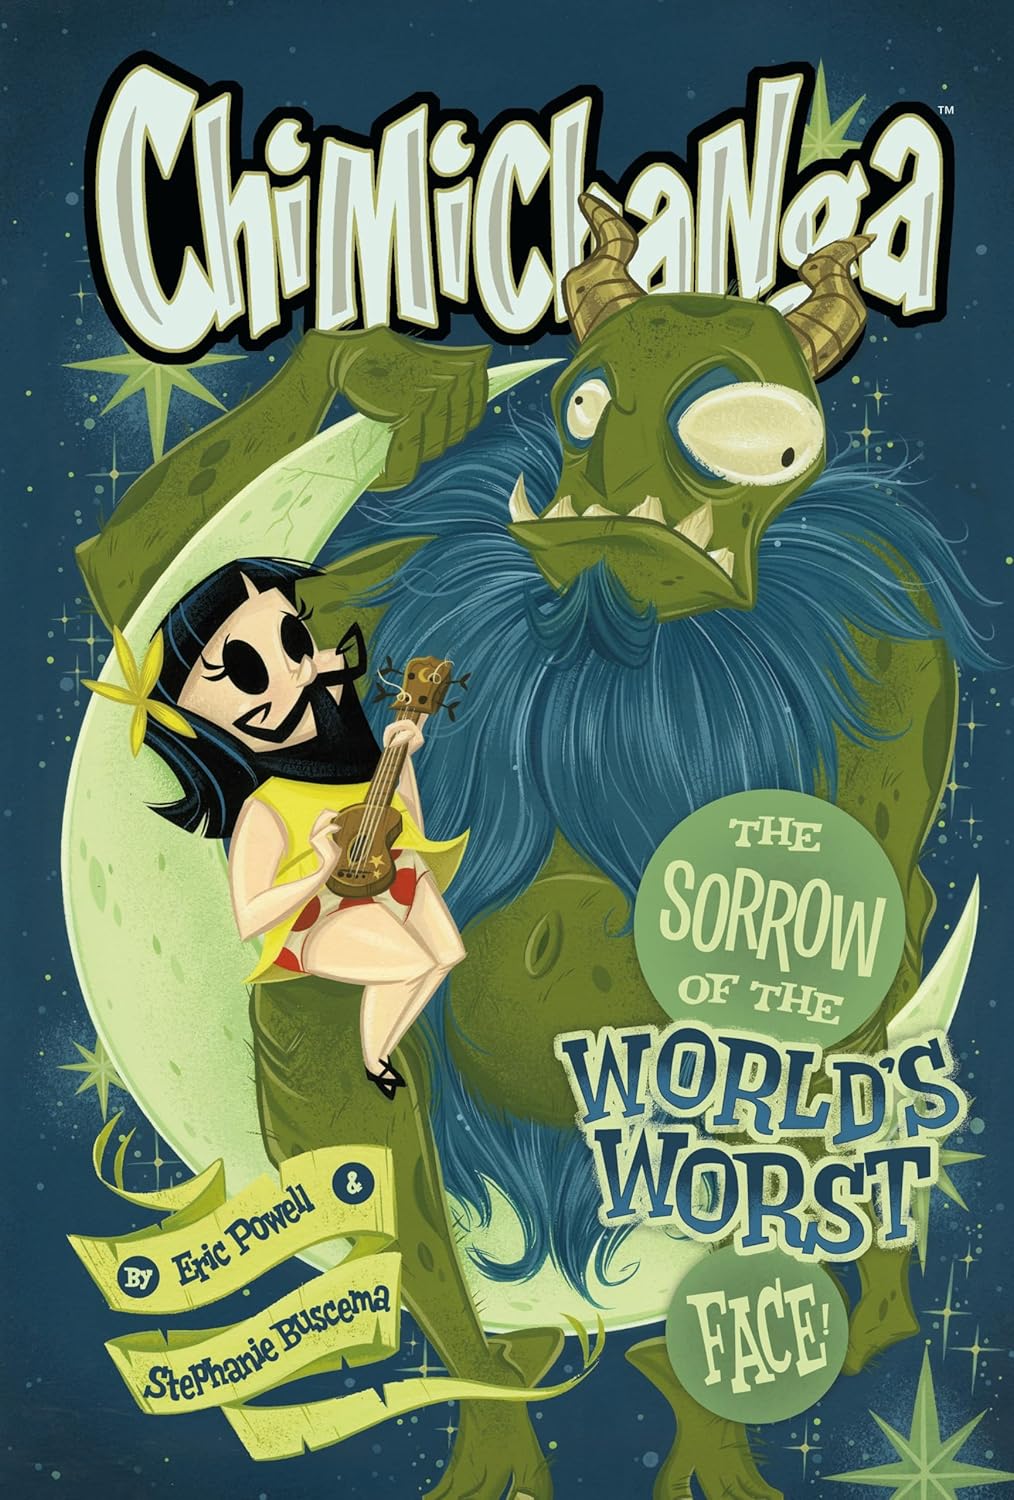 Chimichanga: Sorrow Of The World's Worst Face HC by Eric Powell